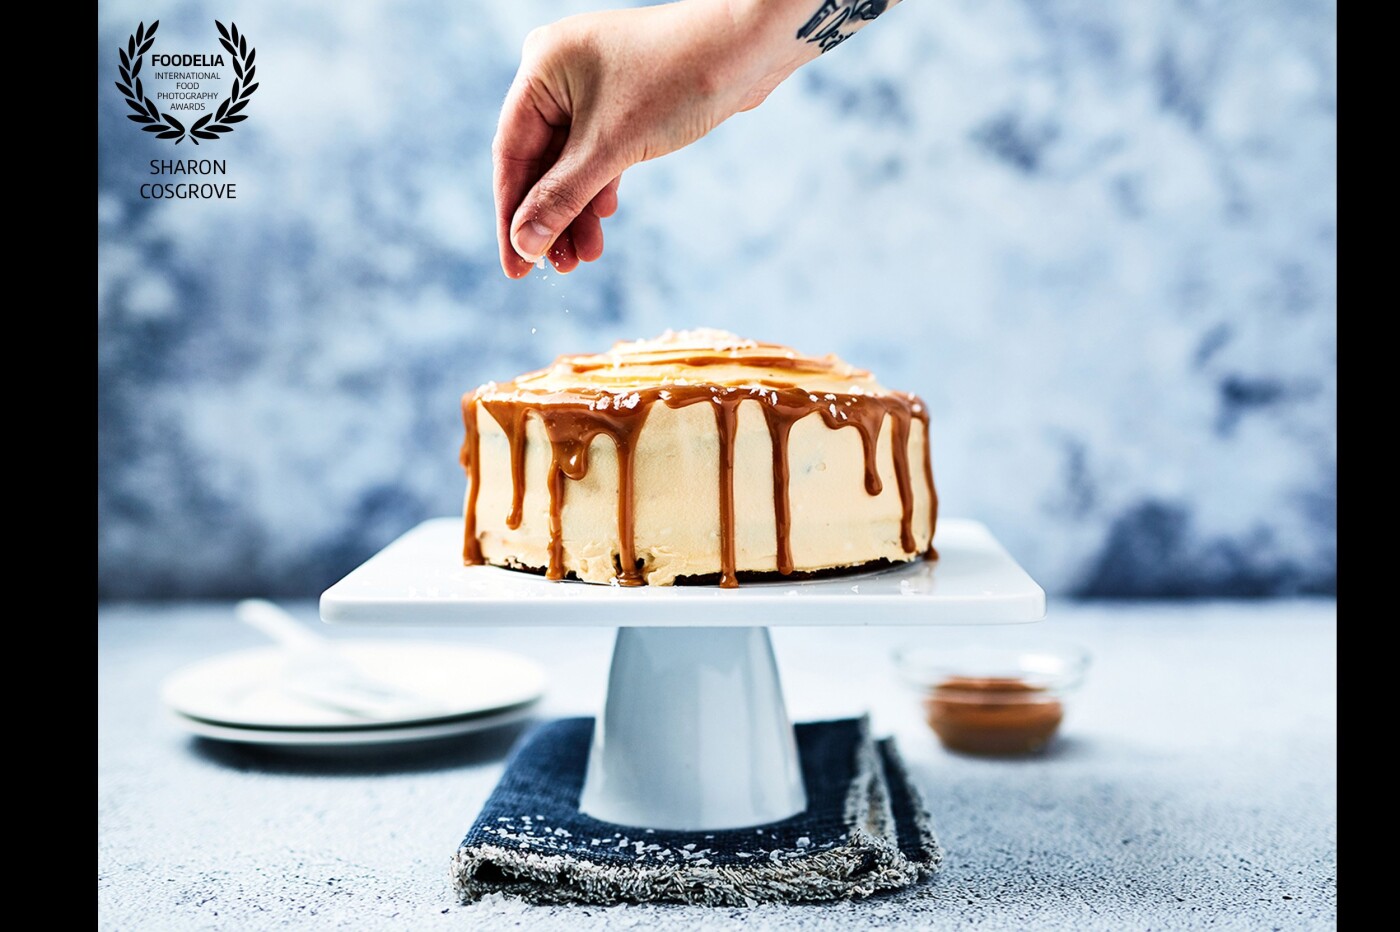 This was a special celebration cake made for my husband's birthday.  It's a banana cake with salted caramel icing (frosting) and a salted caramel drip.  Don't be afraid of adding a good pinch of salt to the caramel, as much as you can handle! 